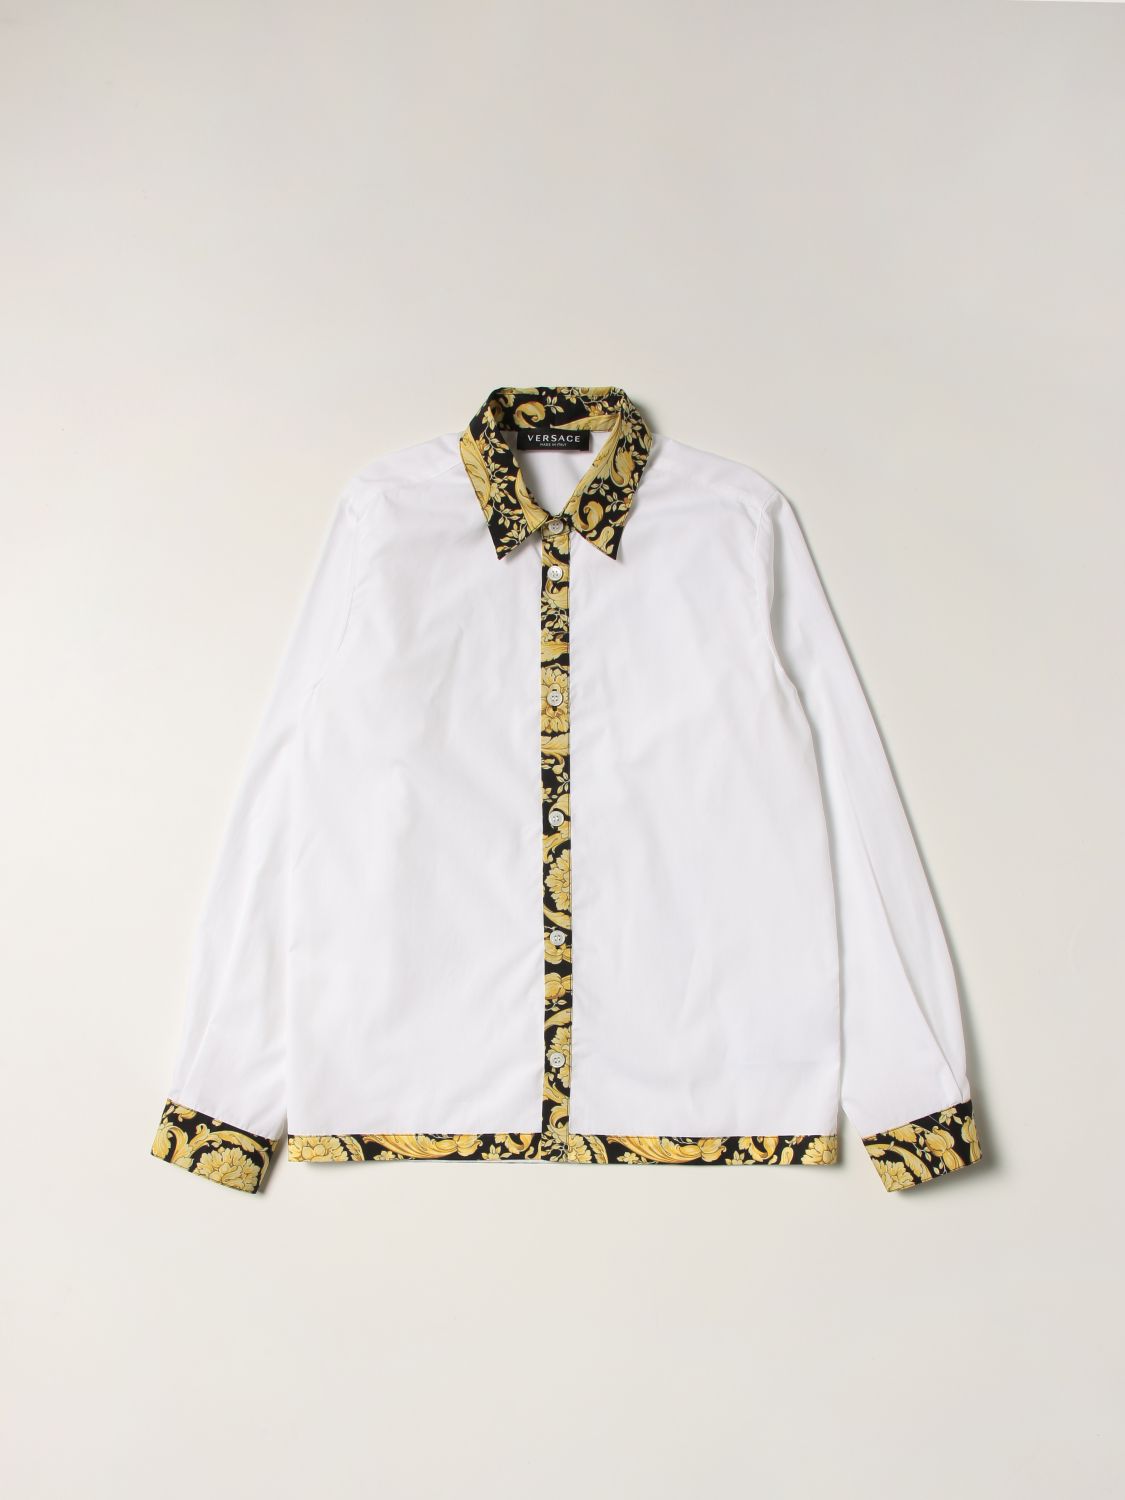 Chemise Young Versace: Chemise Young Versace garçon or 1